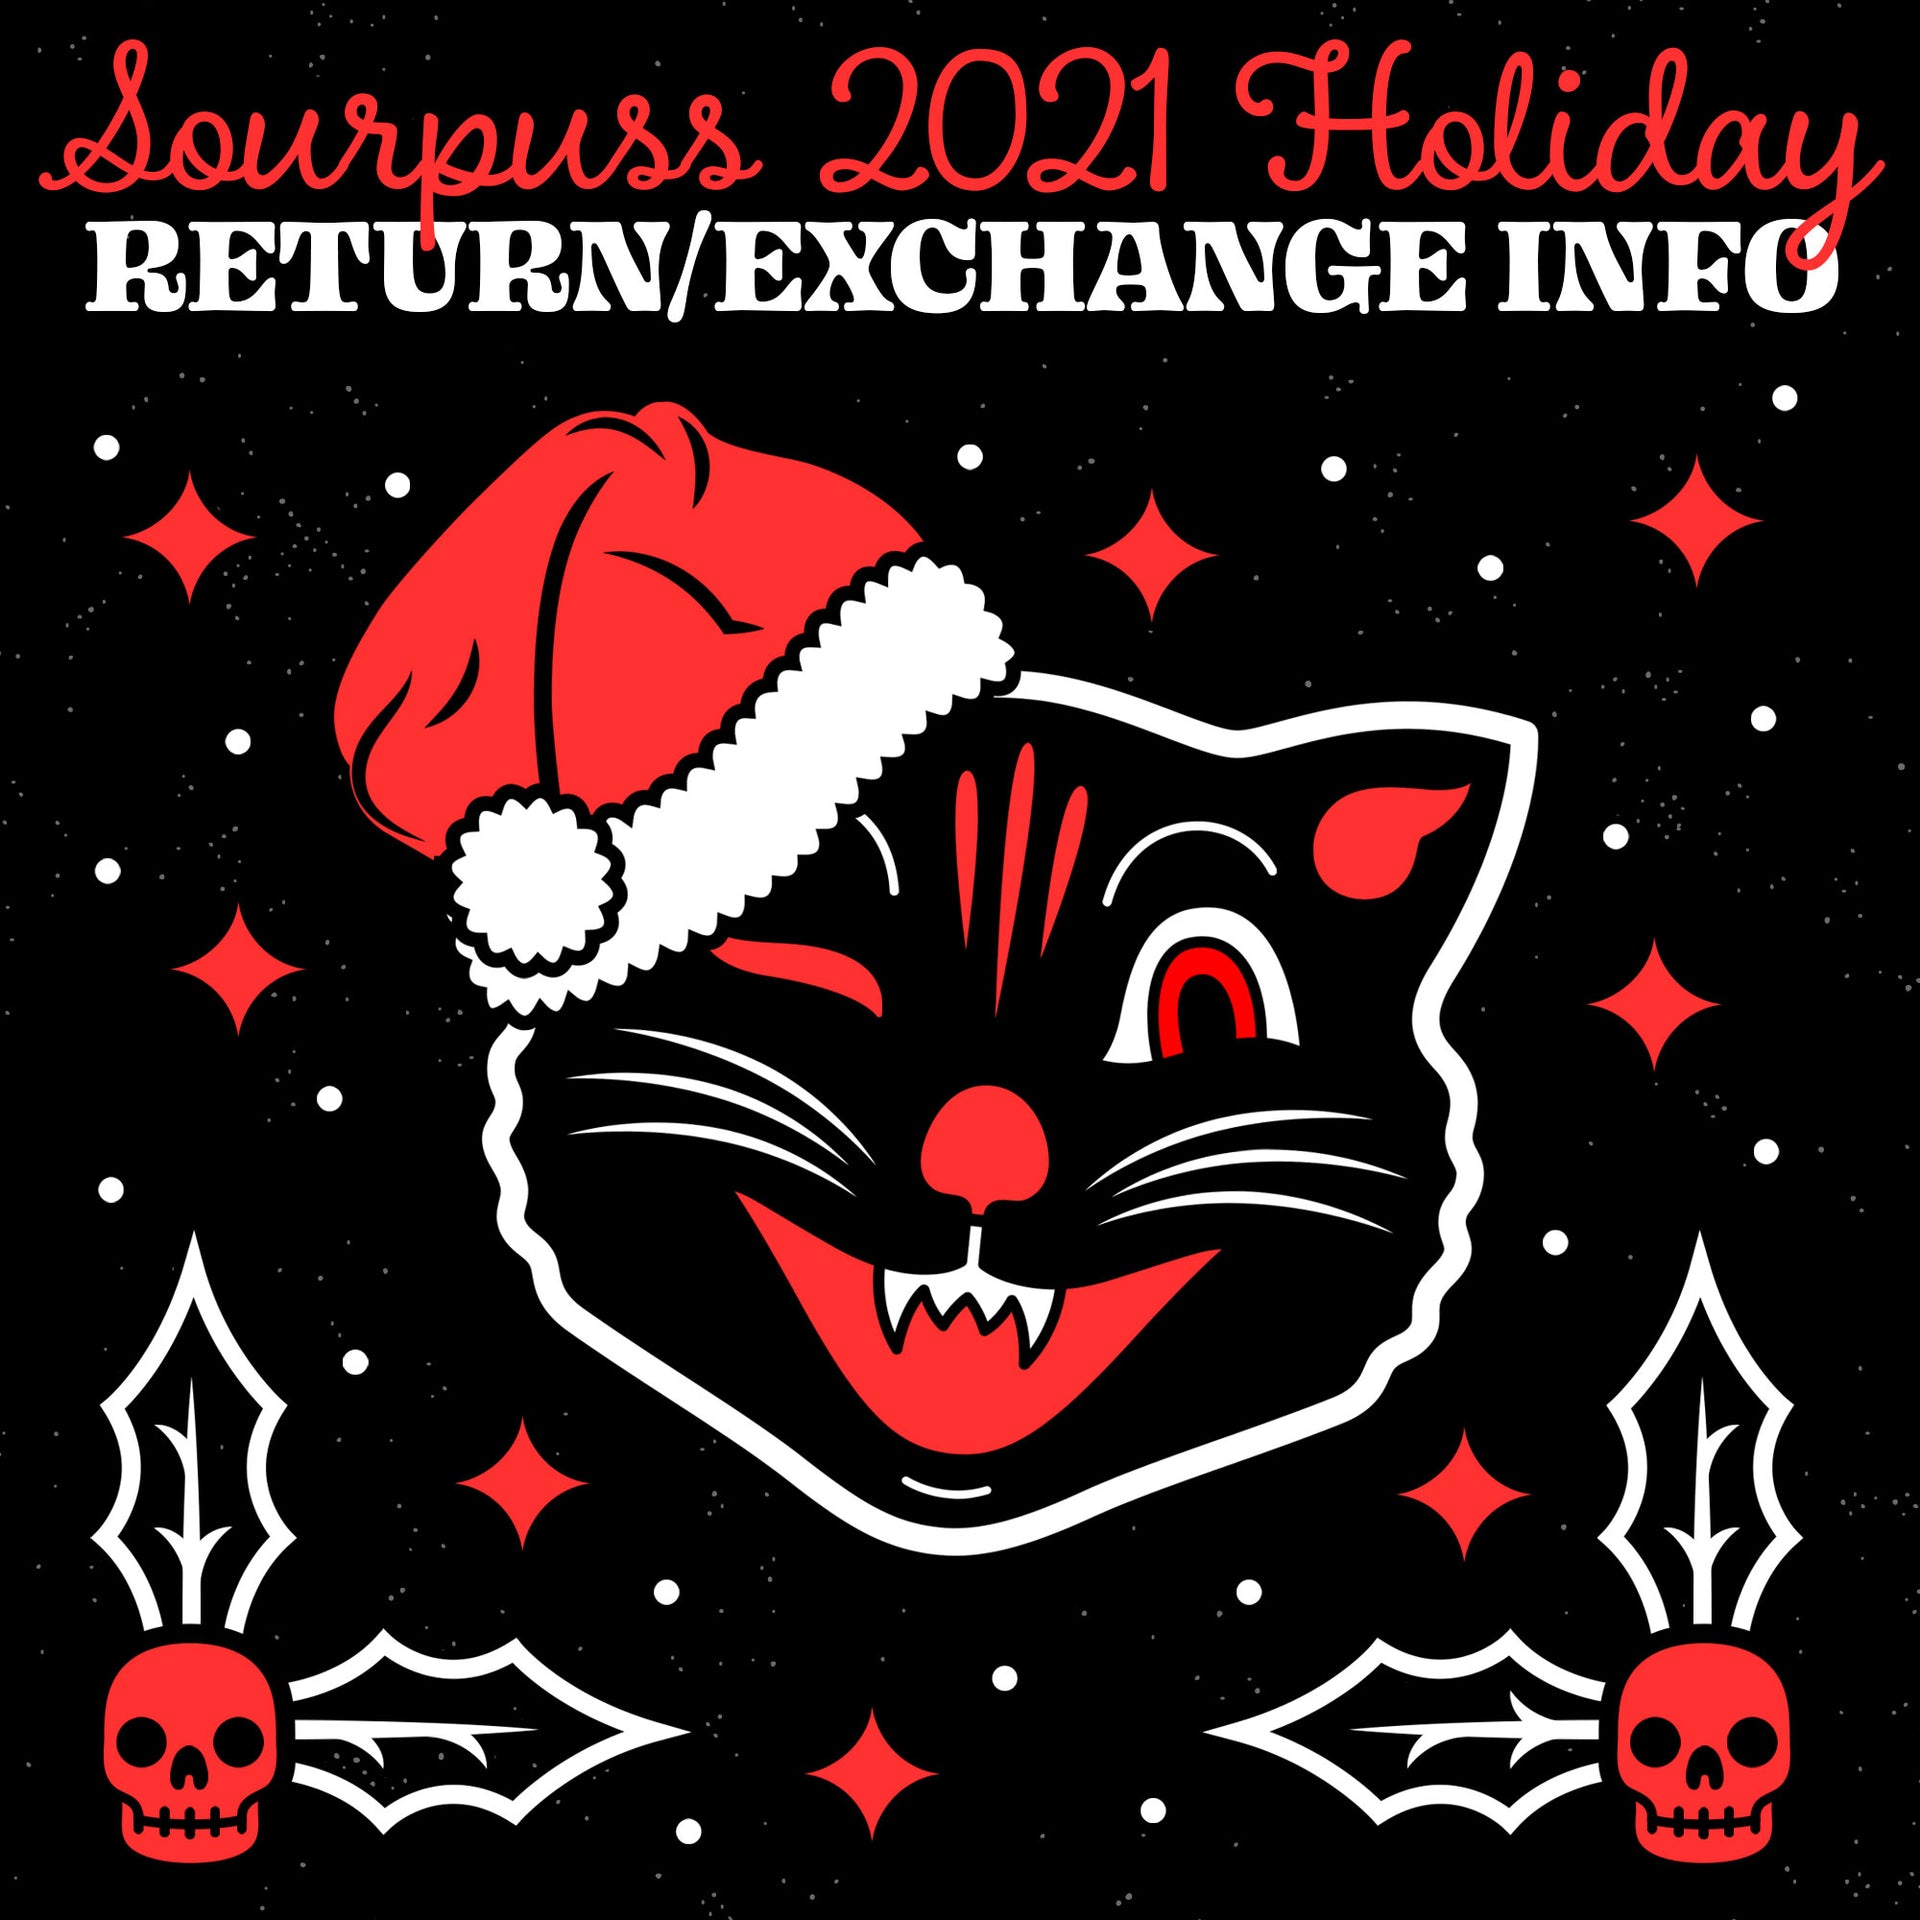 Sourpuss Exchange and Return policy extended!